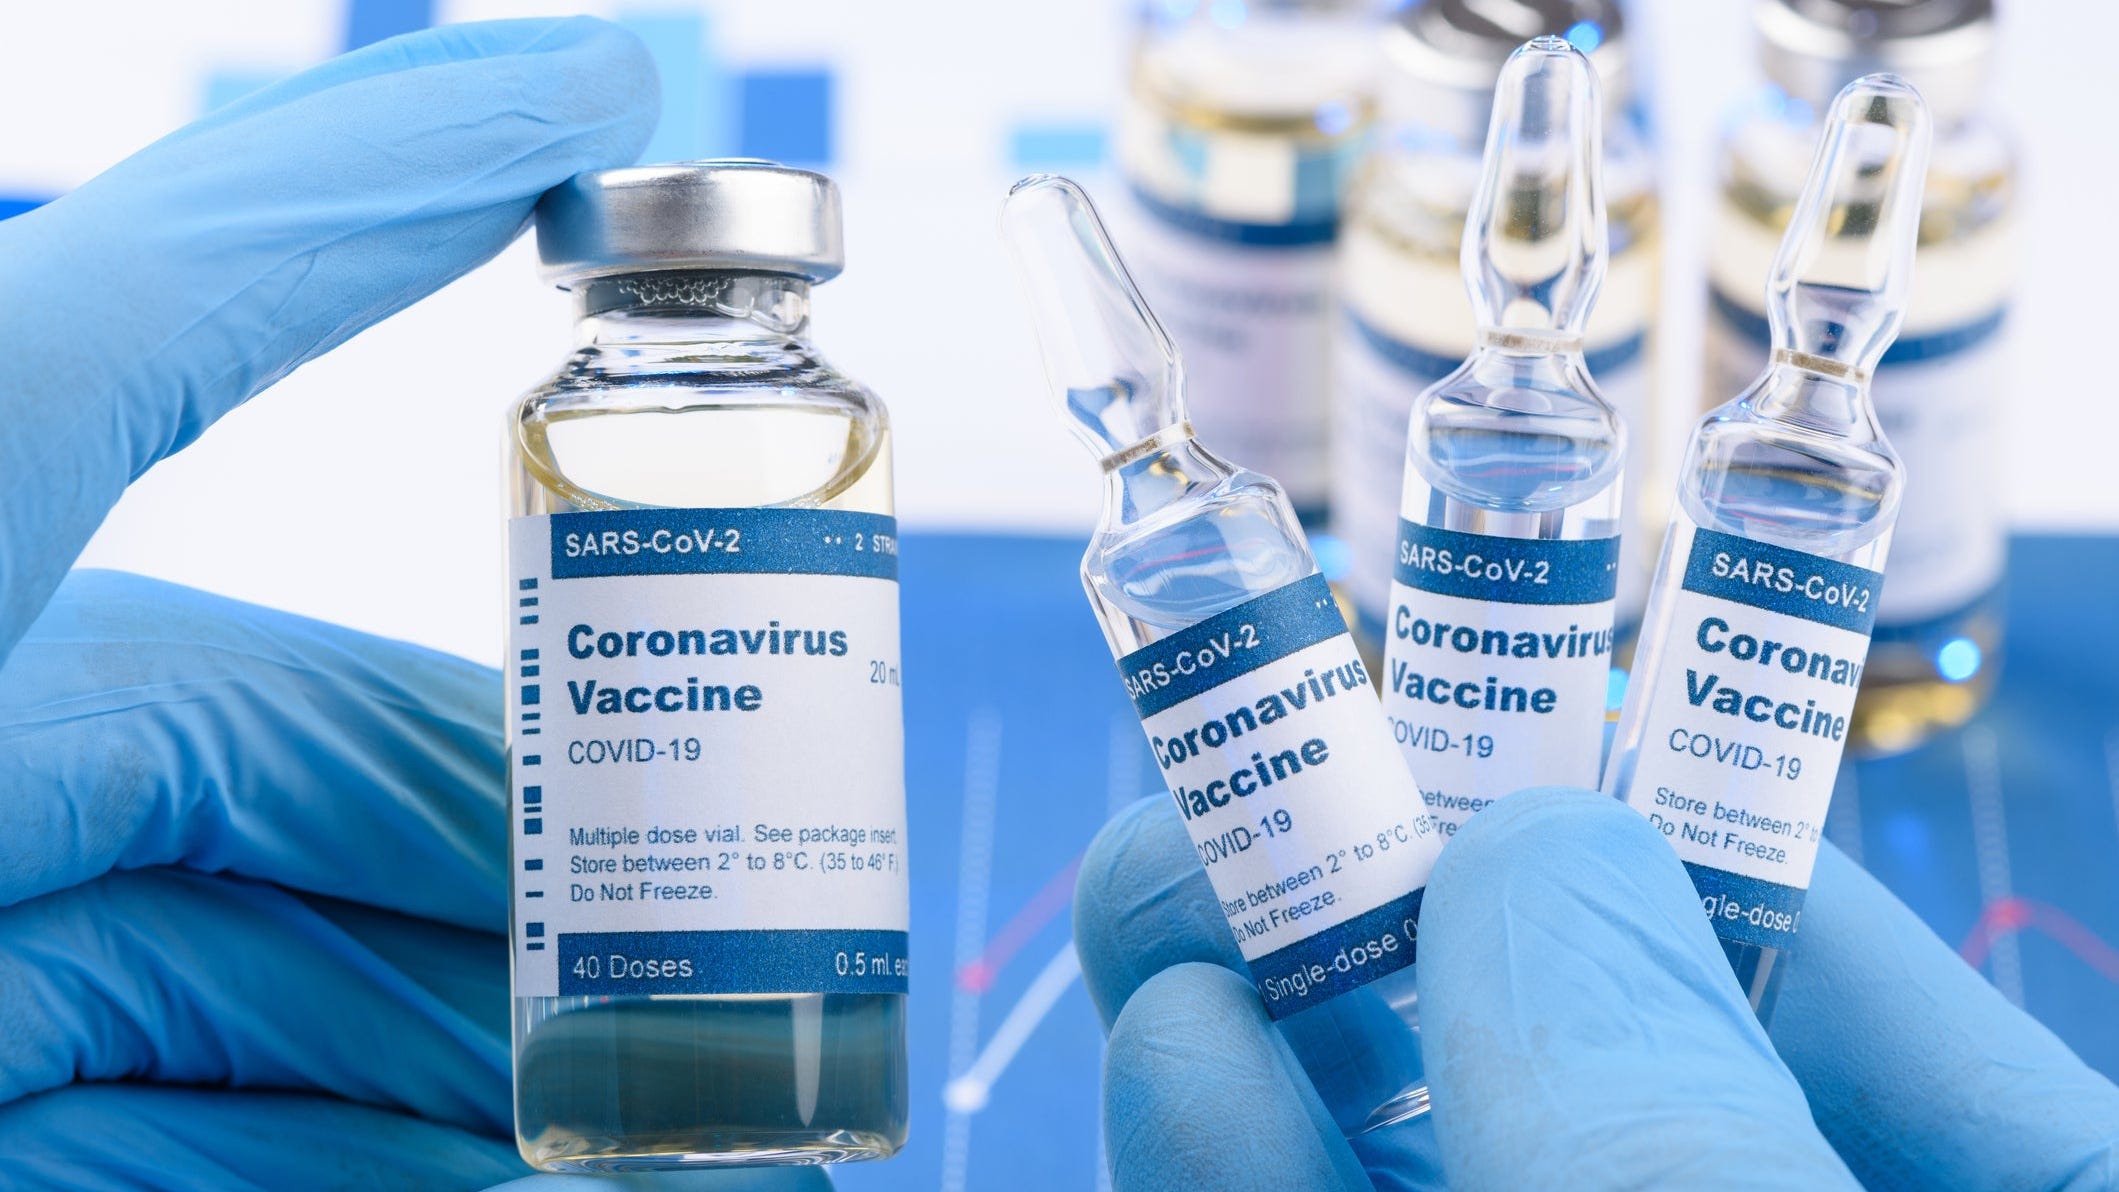 Beaumont: Another COVID-19 vaccine trial coming to Michigan